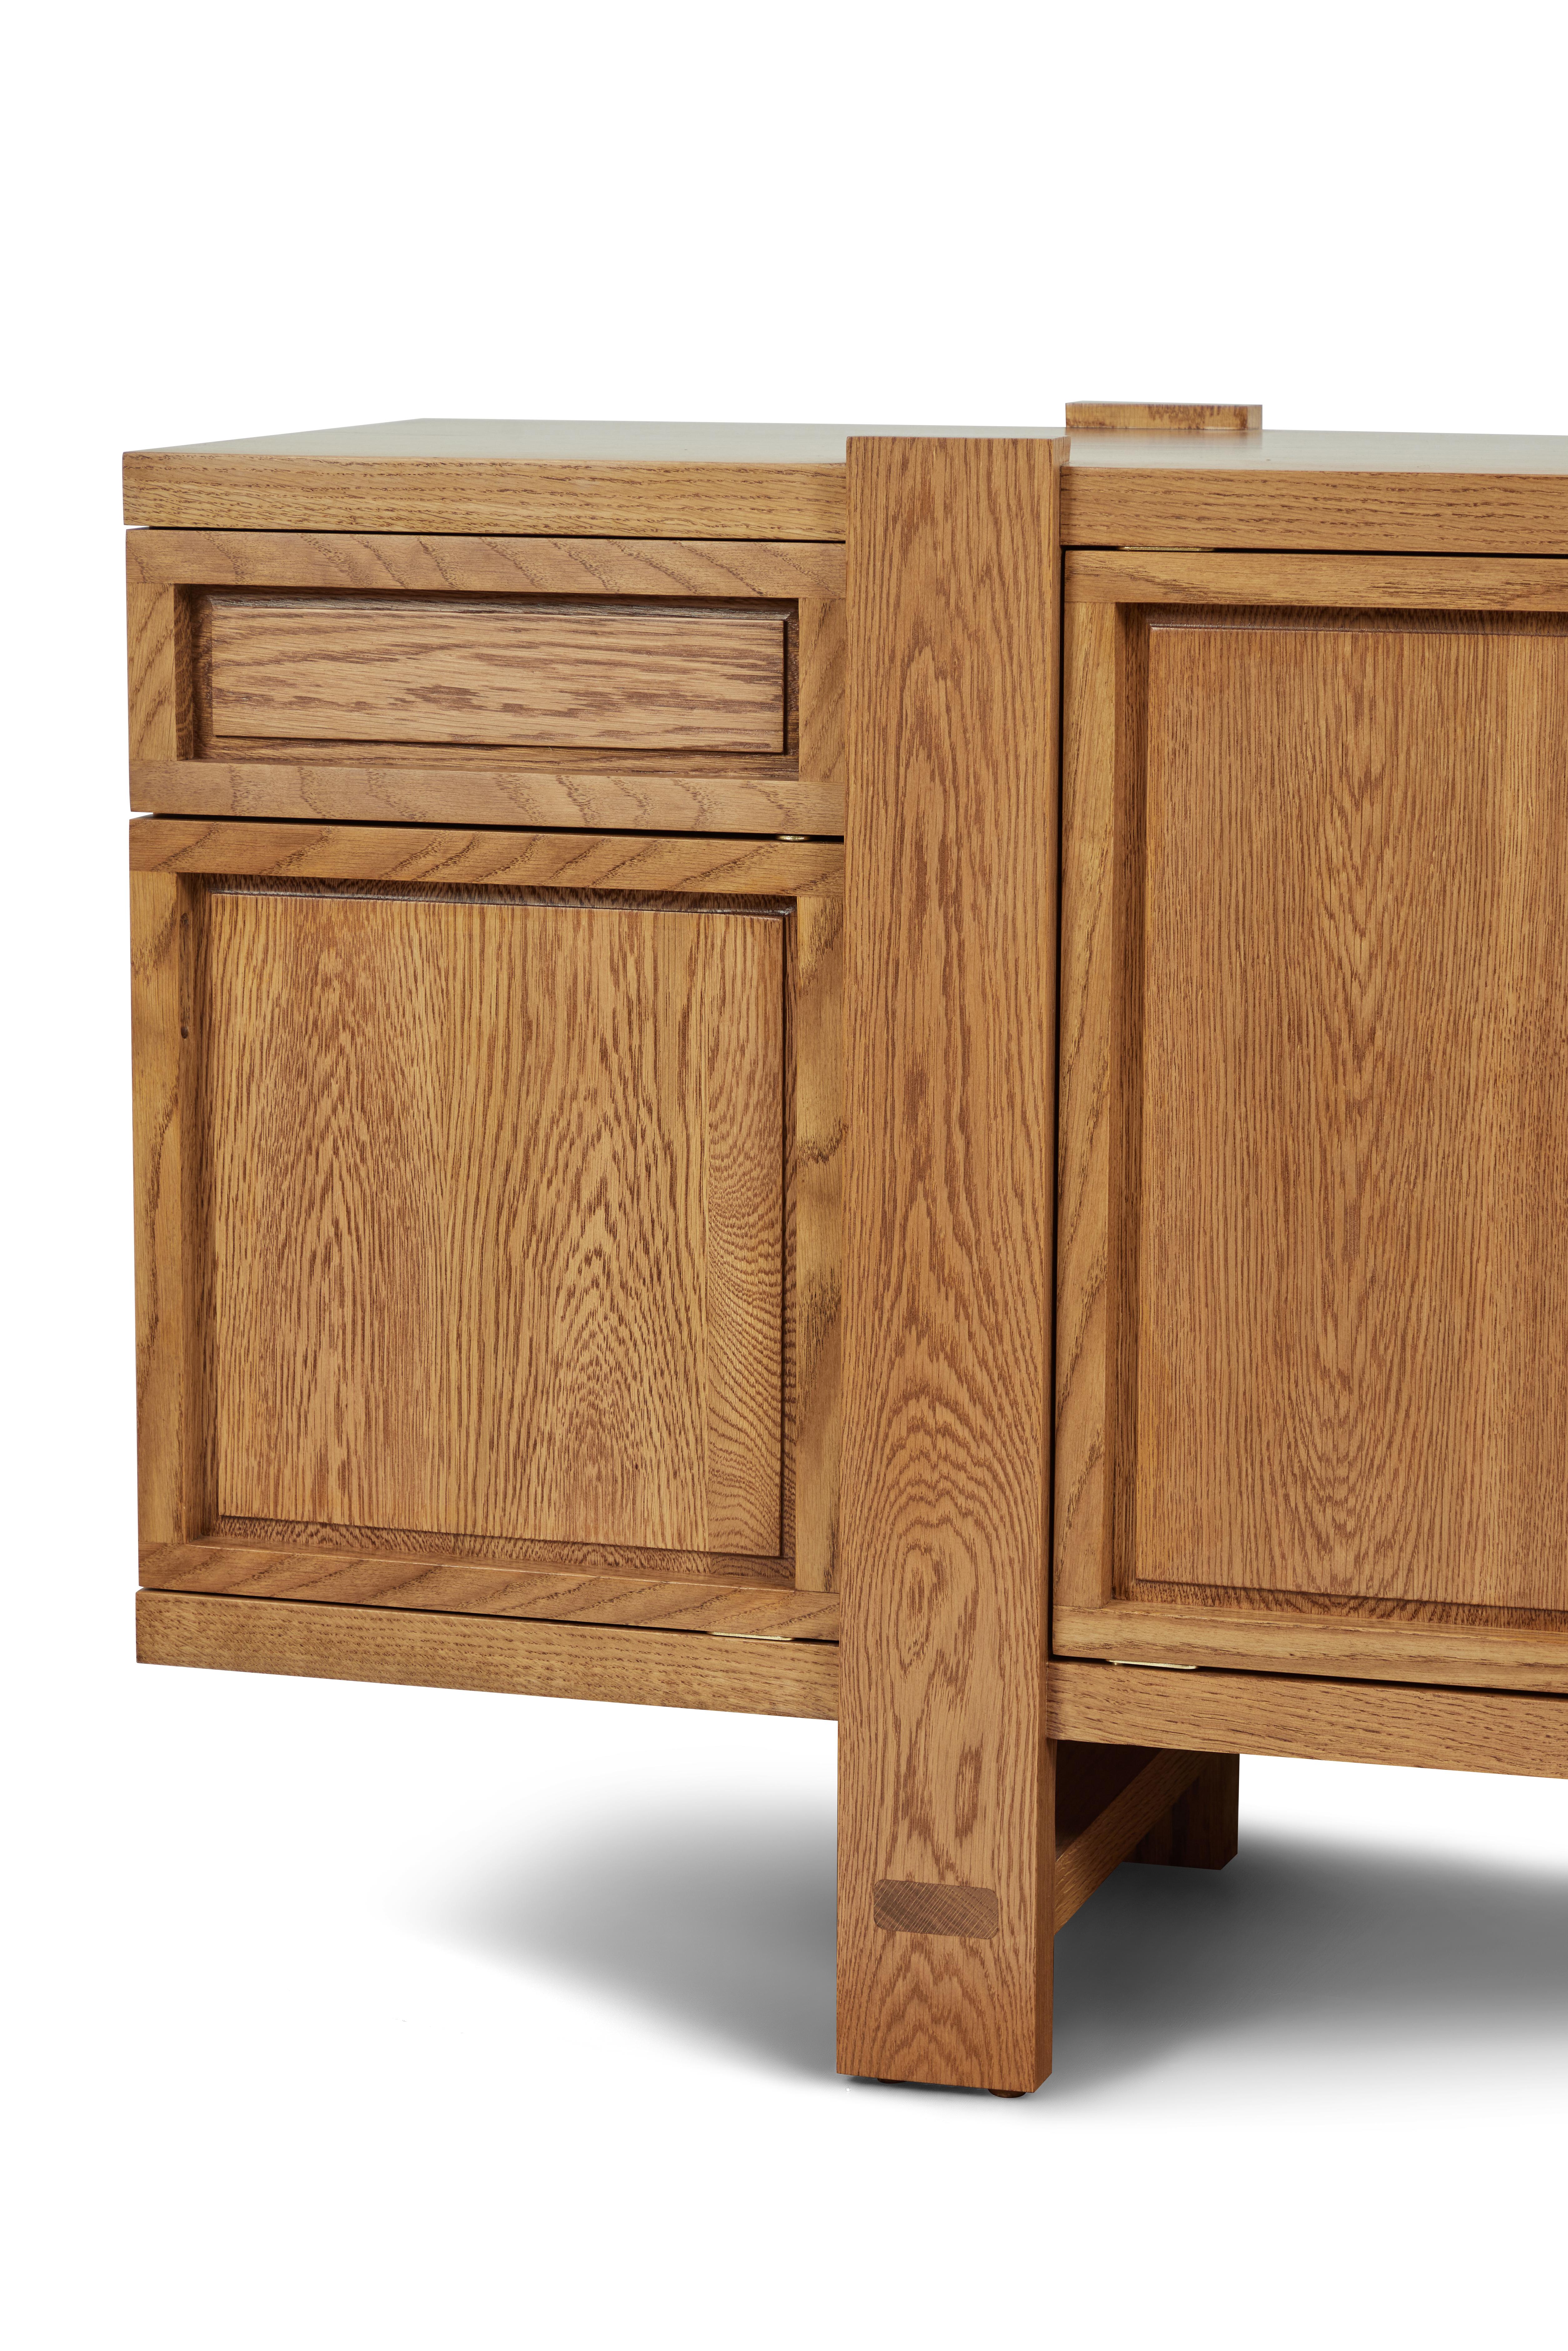 Joinery Lake Sideboard, in Summer Aged White Oak, by August Abode For Sale